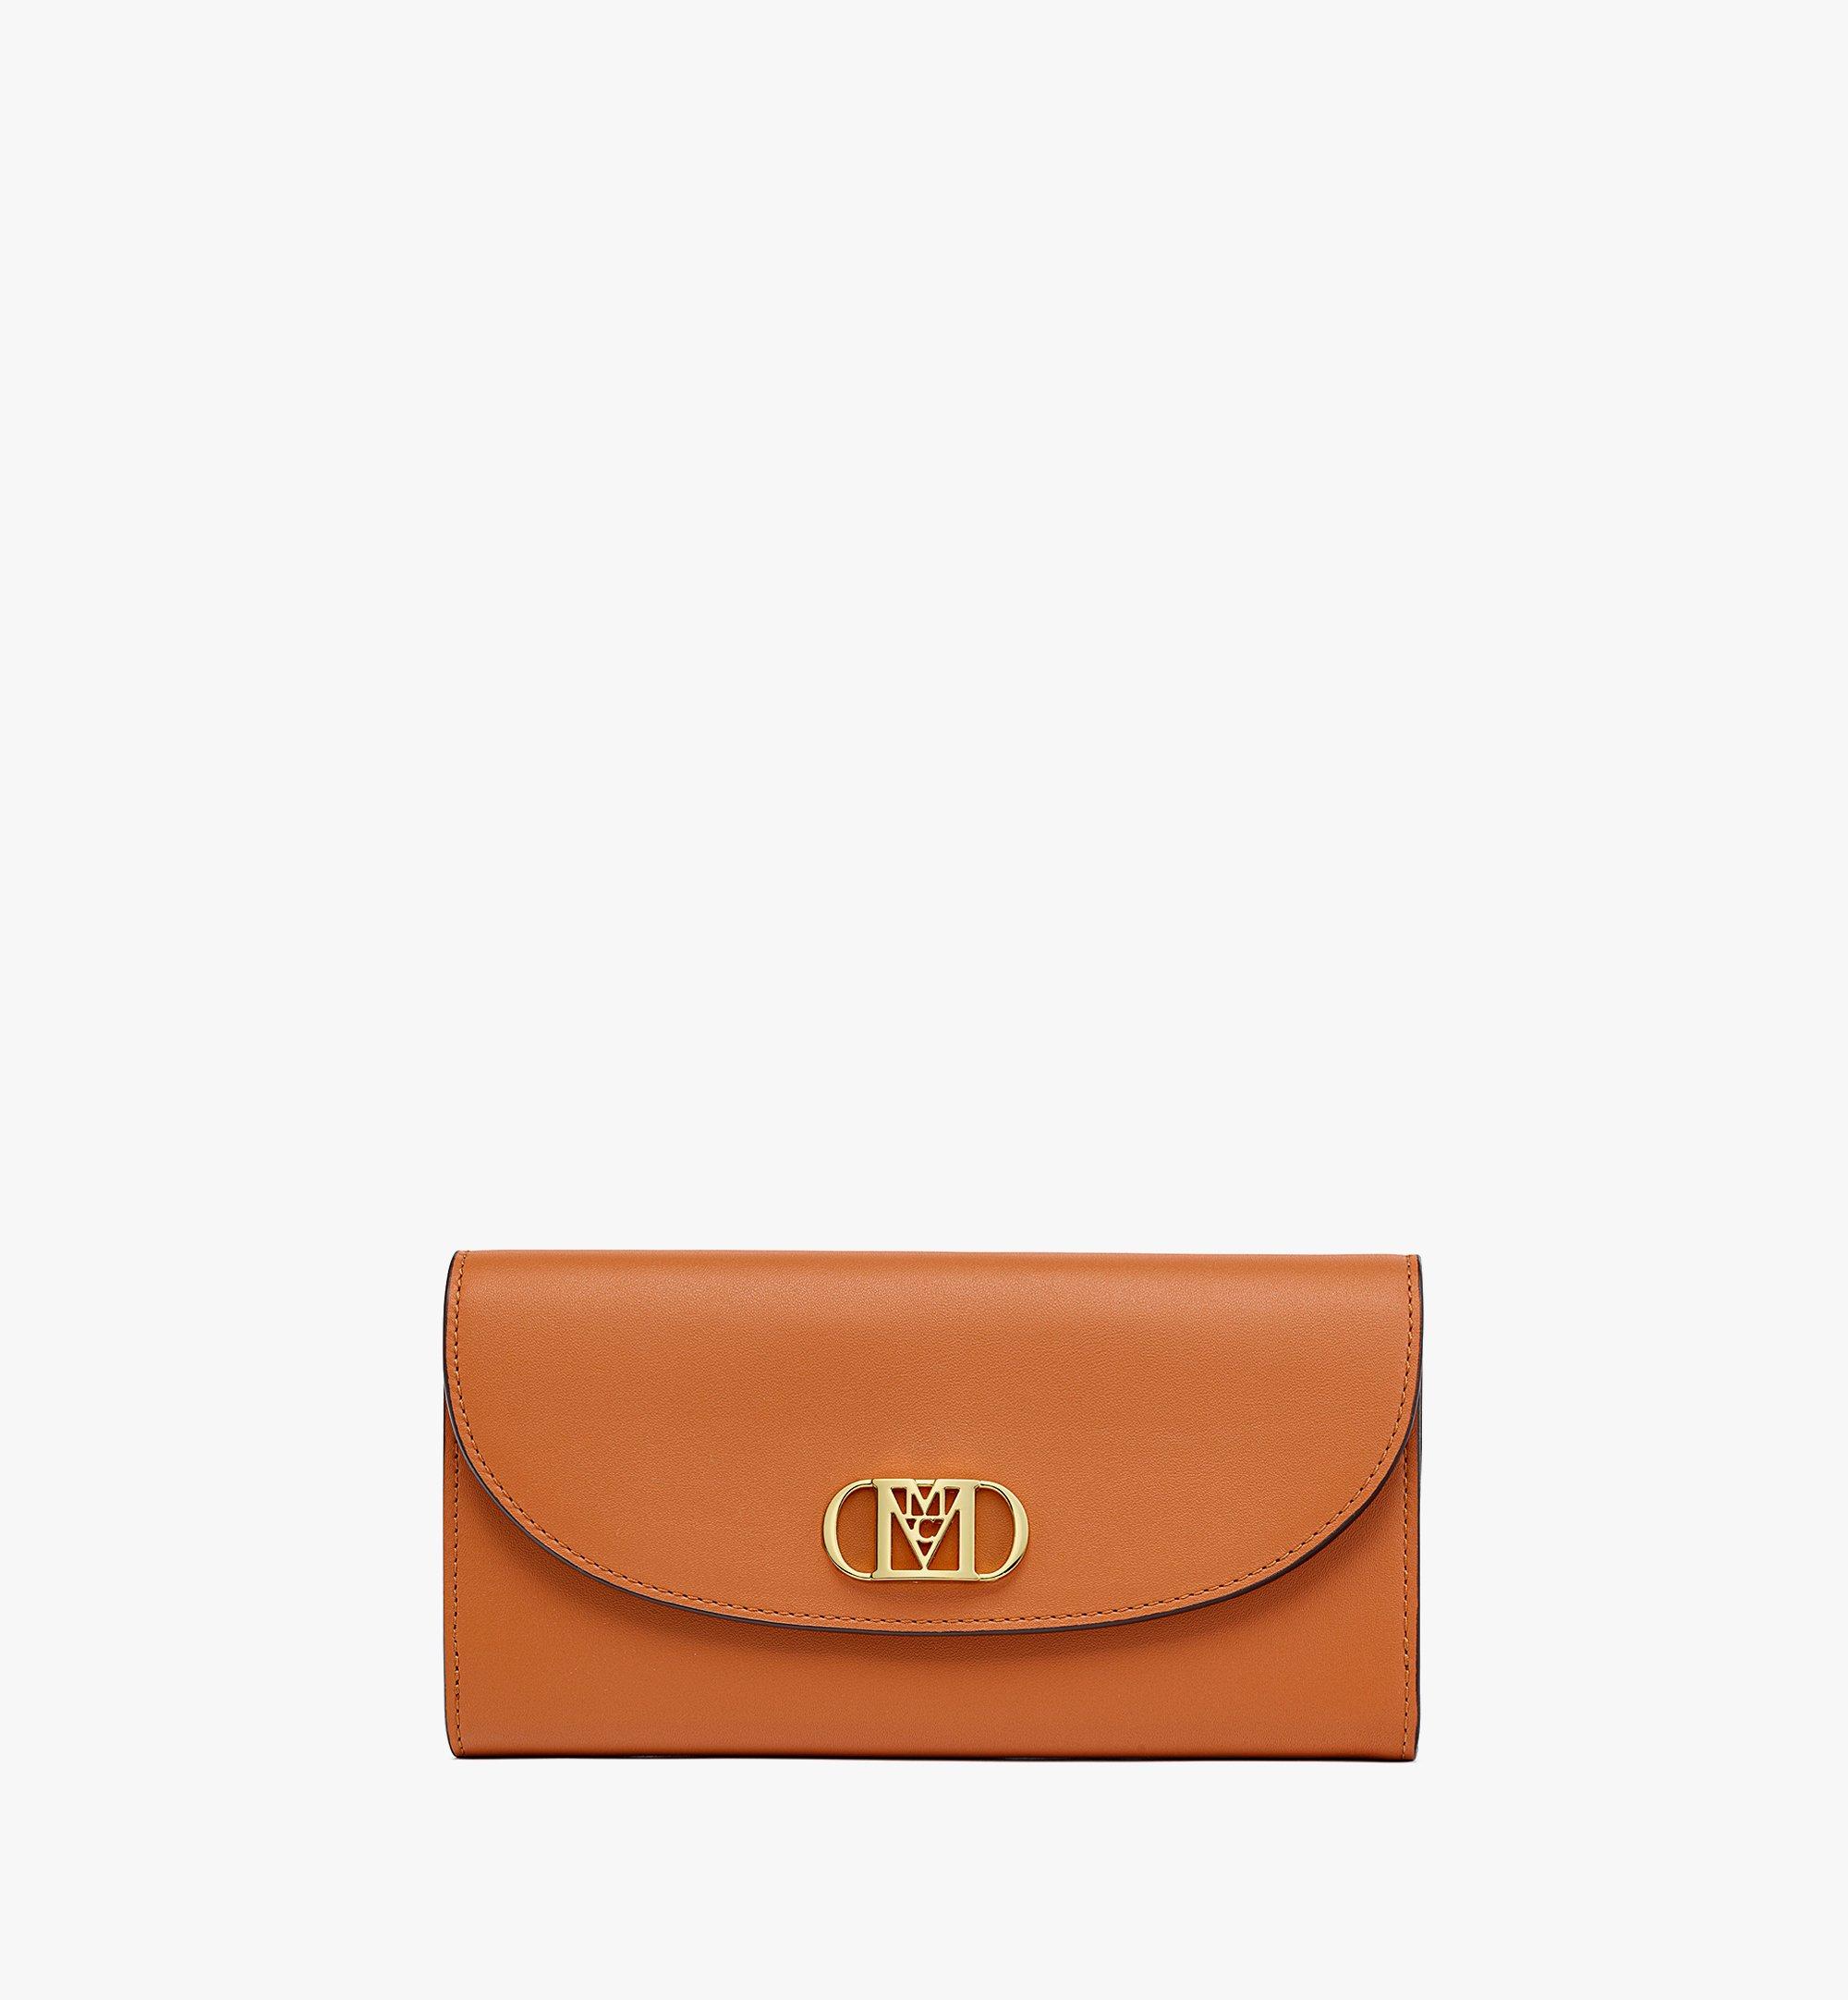 MCM Wallets − Sale: up to −75%